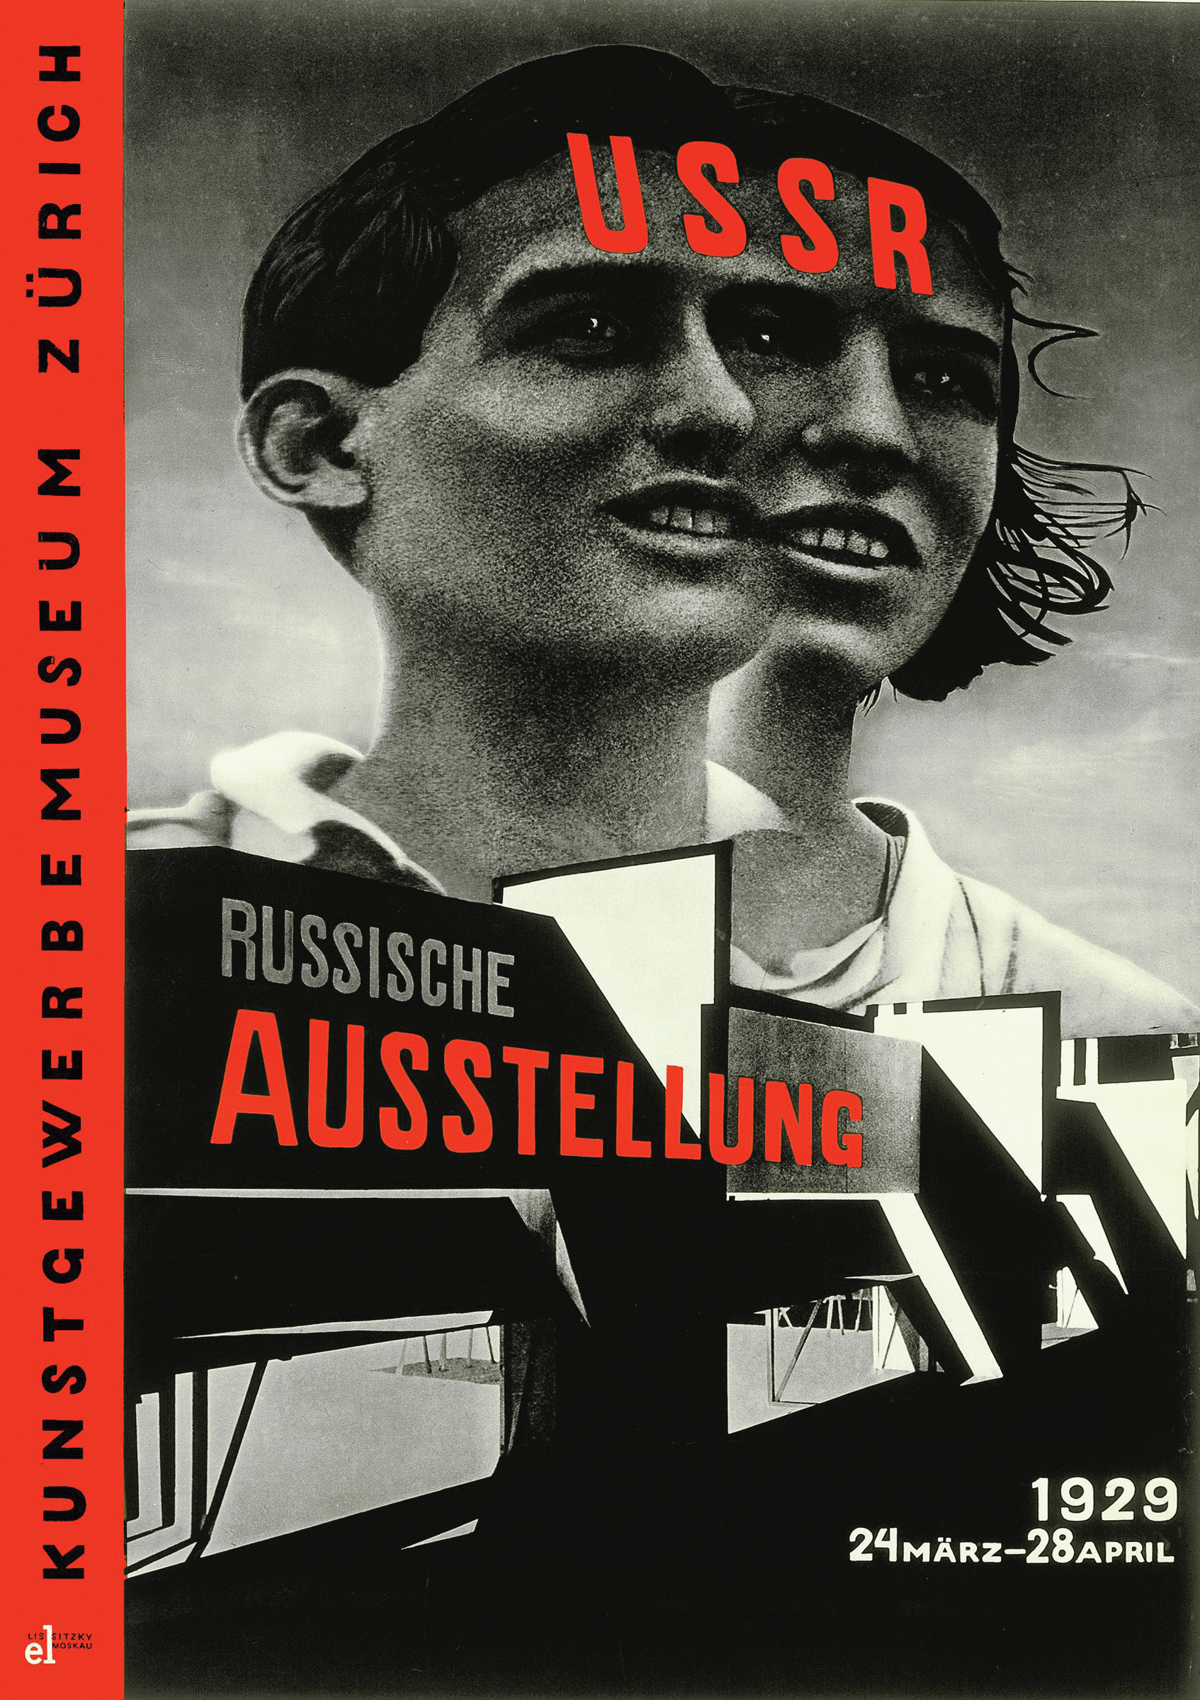 Poster from the Kunstgewerbe Museum Zurich. Black and white photo of two faces merging above the facade of a building; "USSR" is in red type across the foreheads of the two faces.